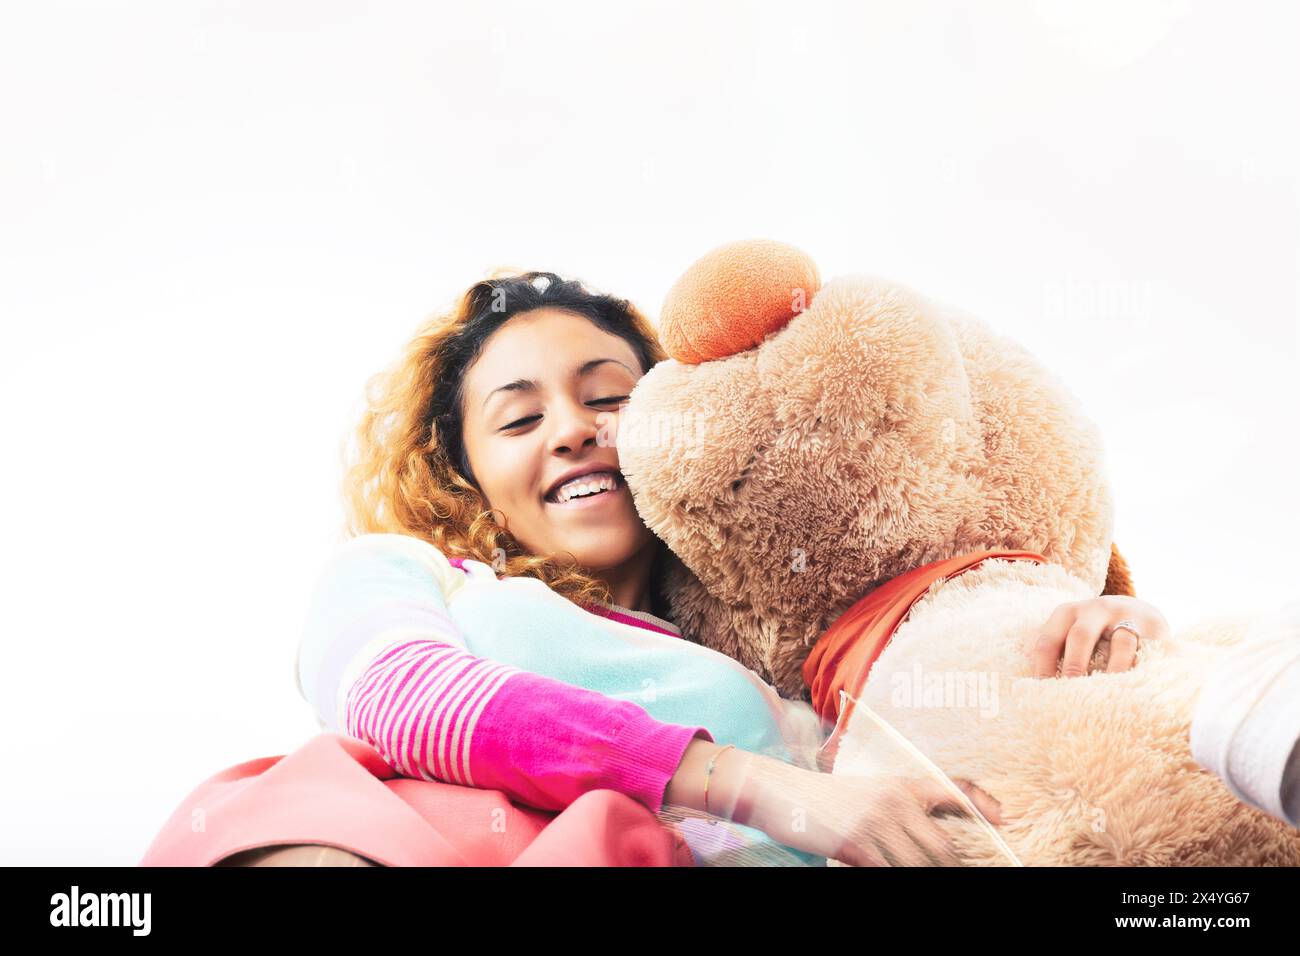 Radiant young woman embraces a large teddy bear with a joyful smile, her colorful attire adding to the cheerful scene Stock Photo